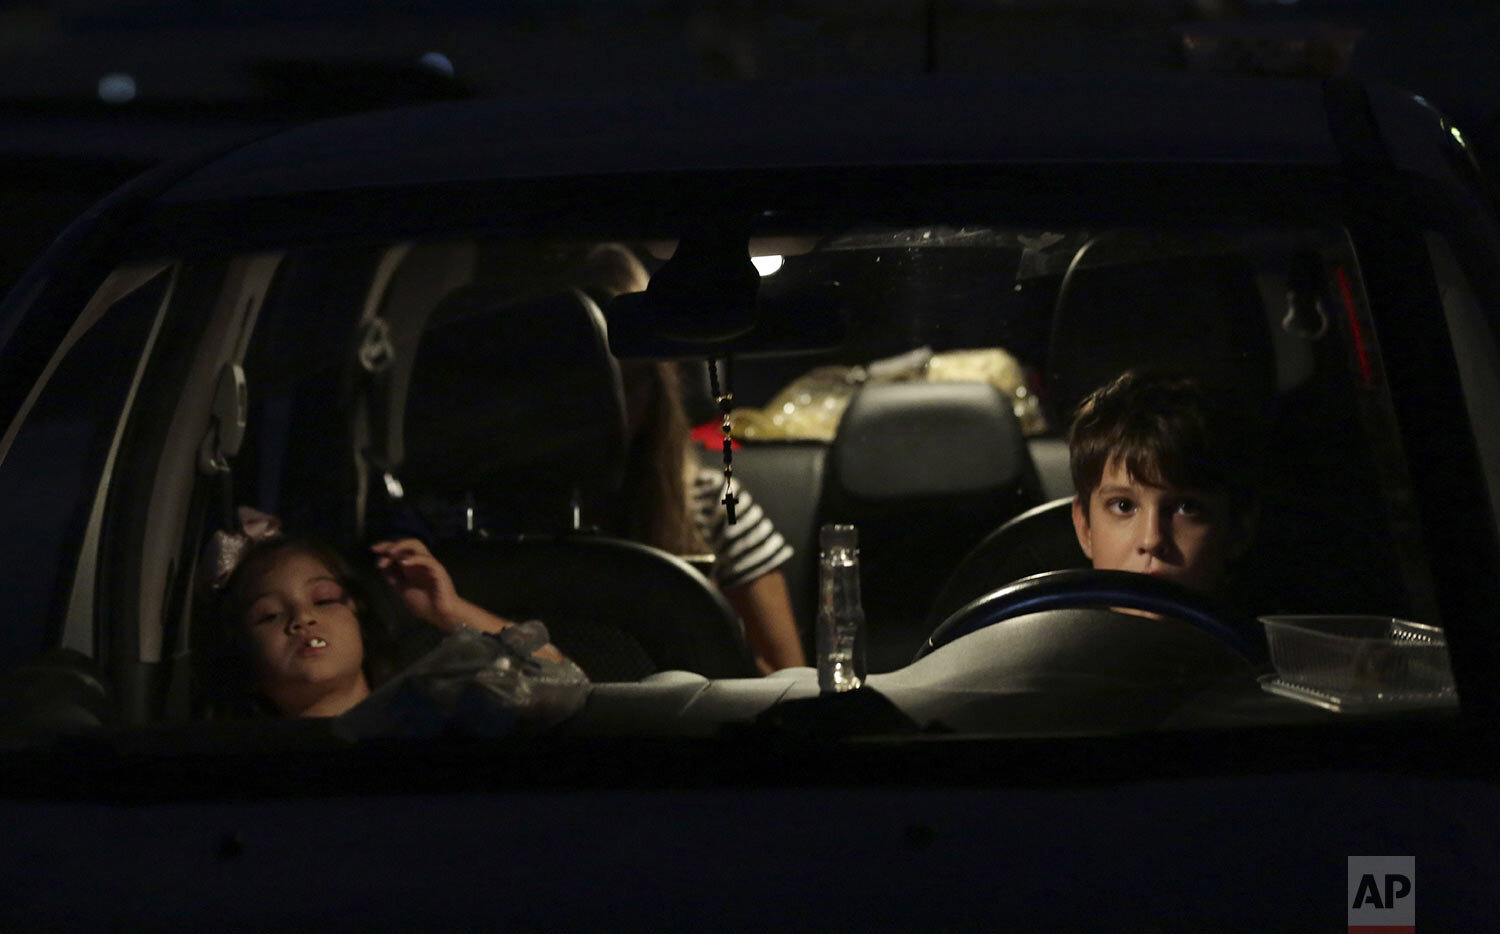  Children watch a film from inside their car at a drive-in movie theater where drivers must leave one space empty between them amid the new coronavirus pandemic in Brasilia, Brazil, Saturday, May 23, 2020. (AP Photo/Eraldo Peres) 